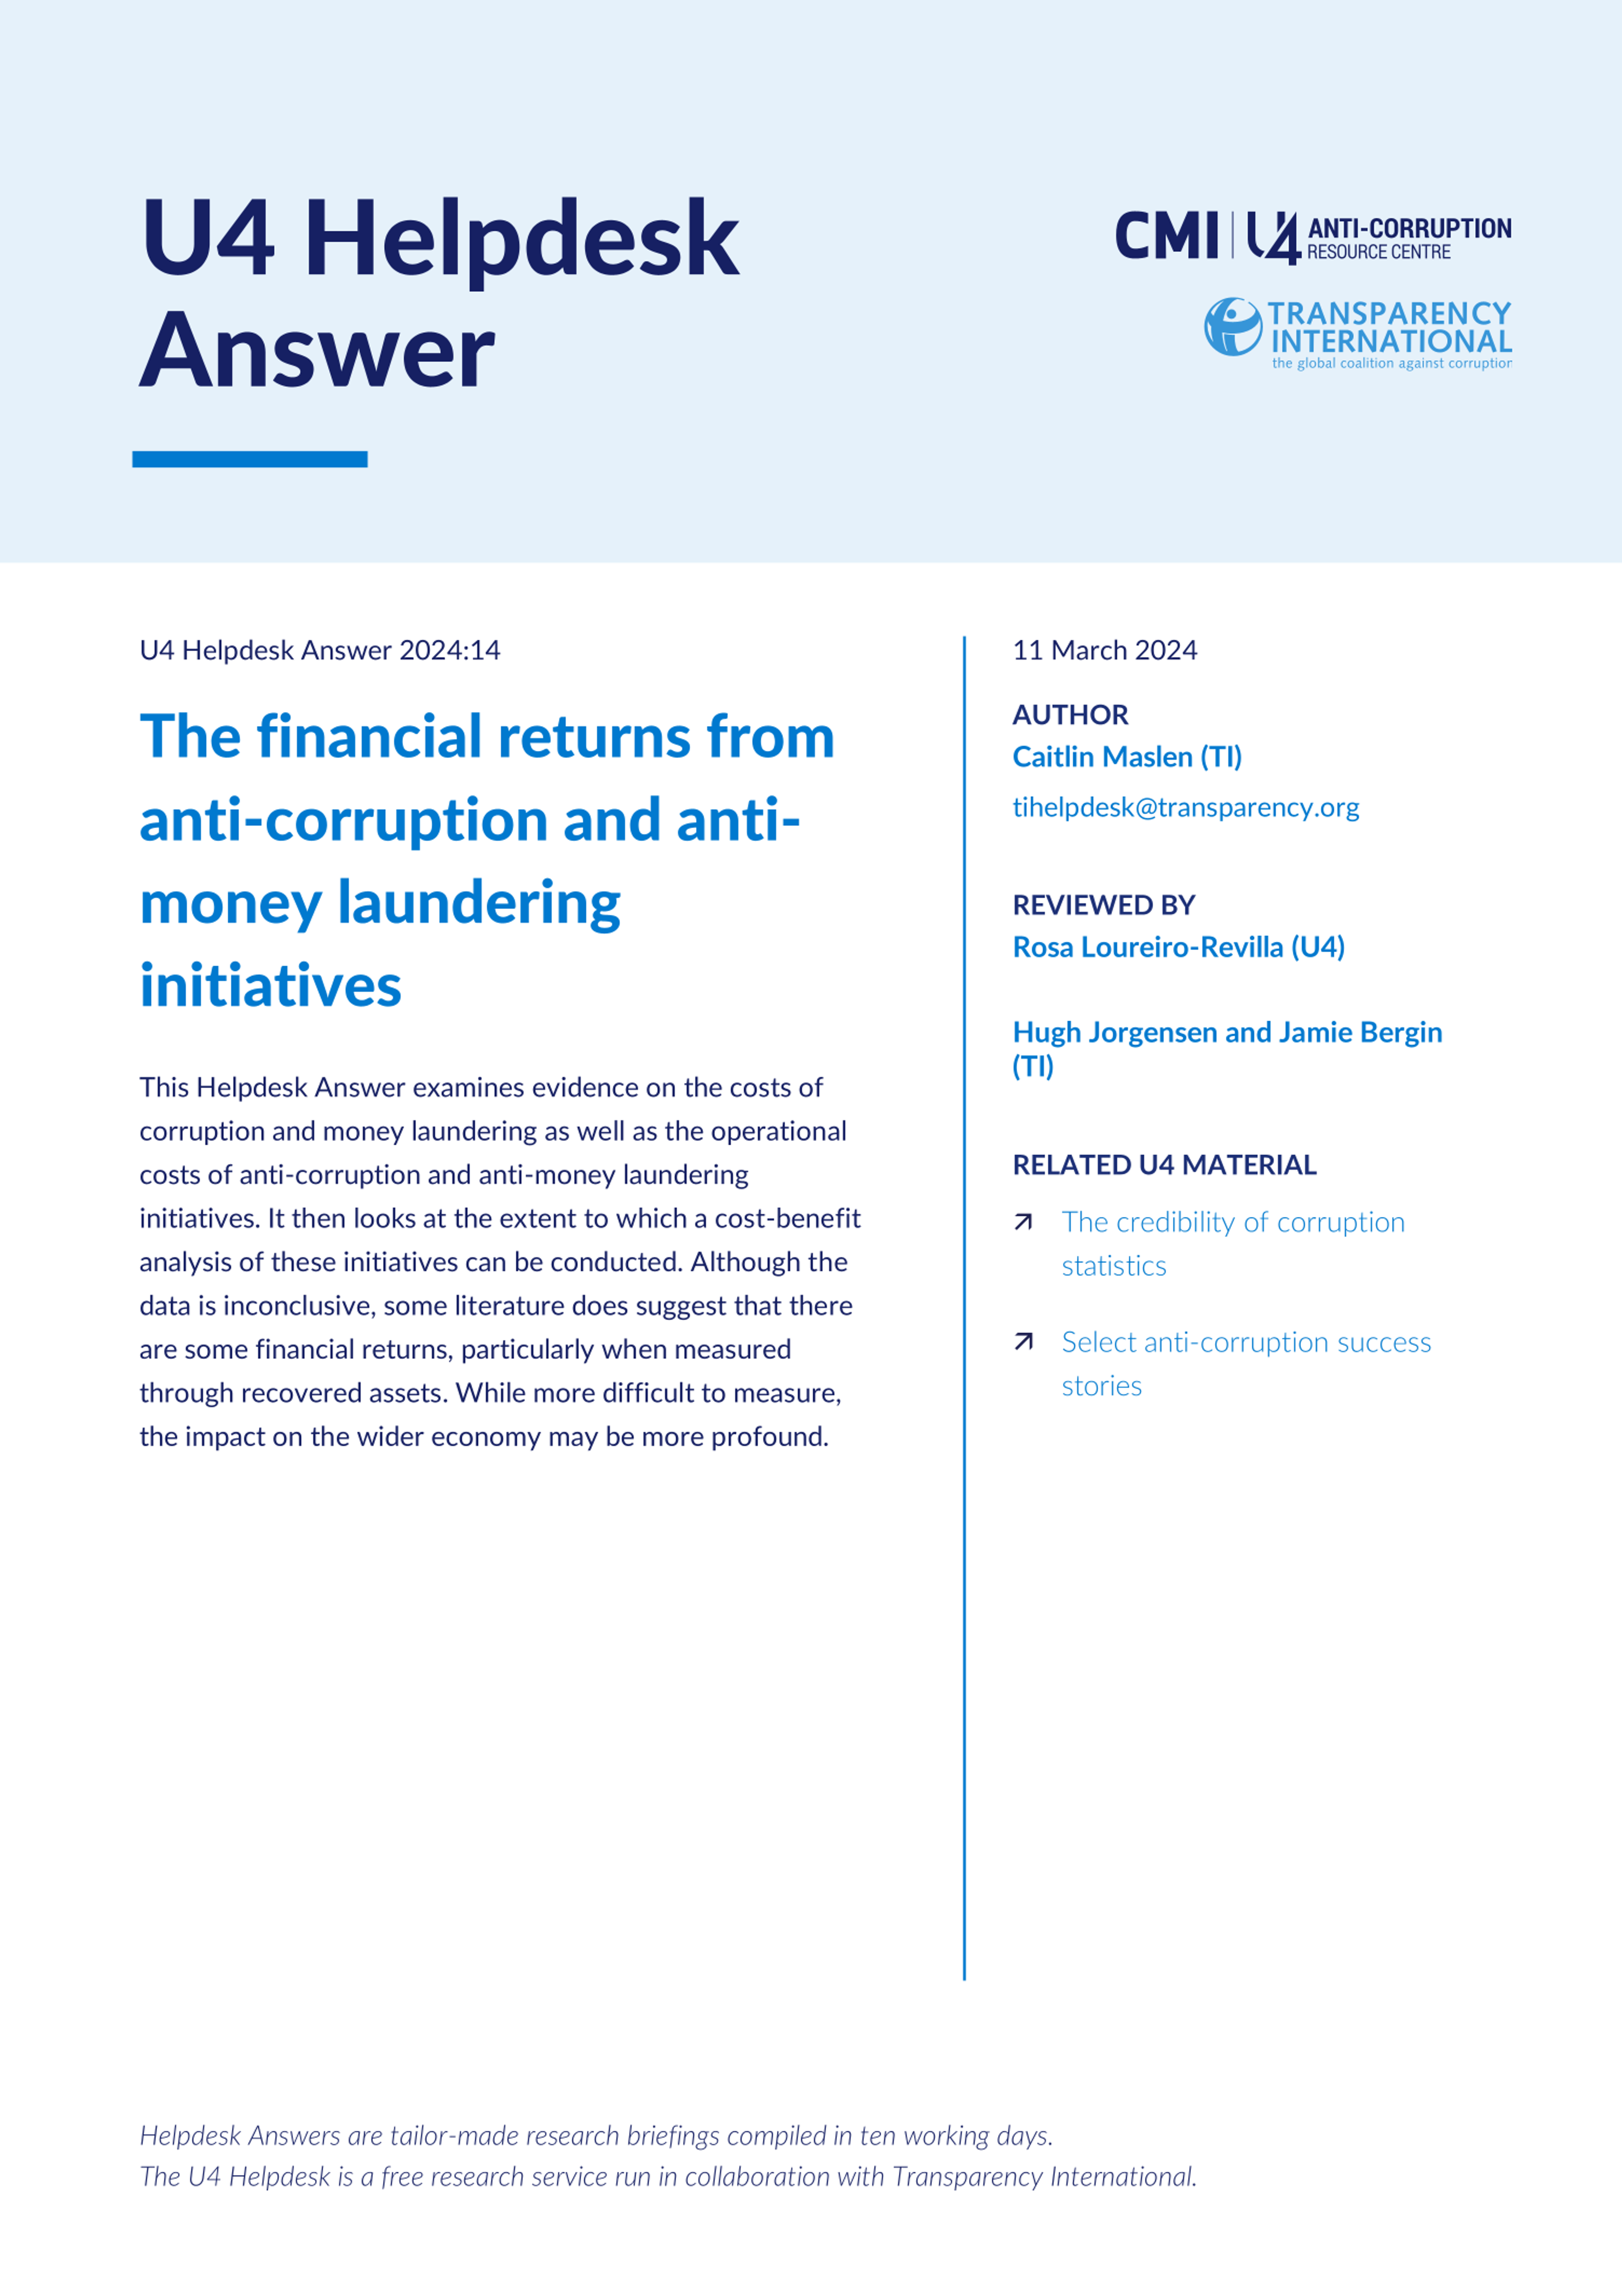 The financial returns from anti-corruption and anti-money laundering initiatives